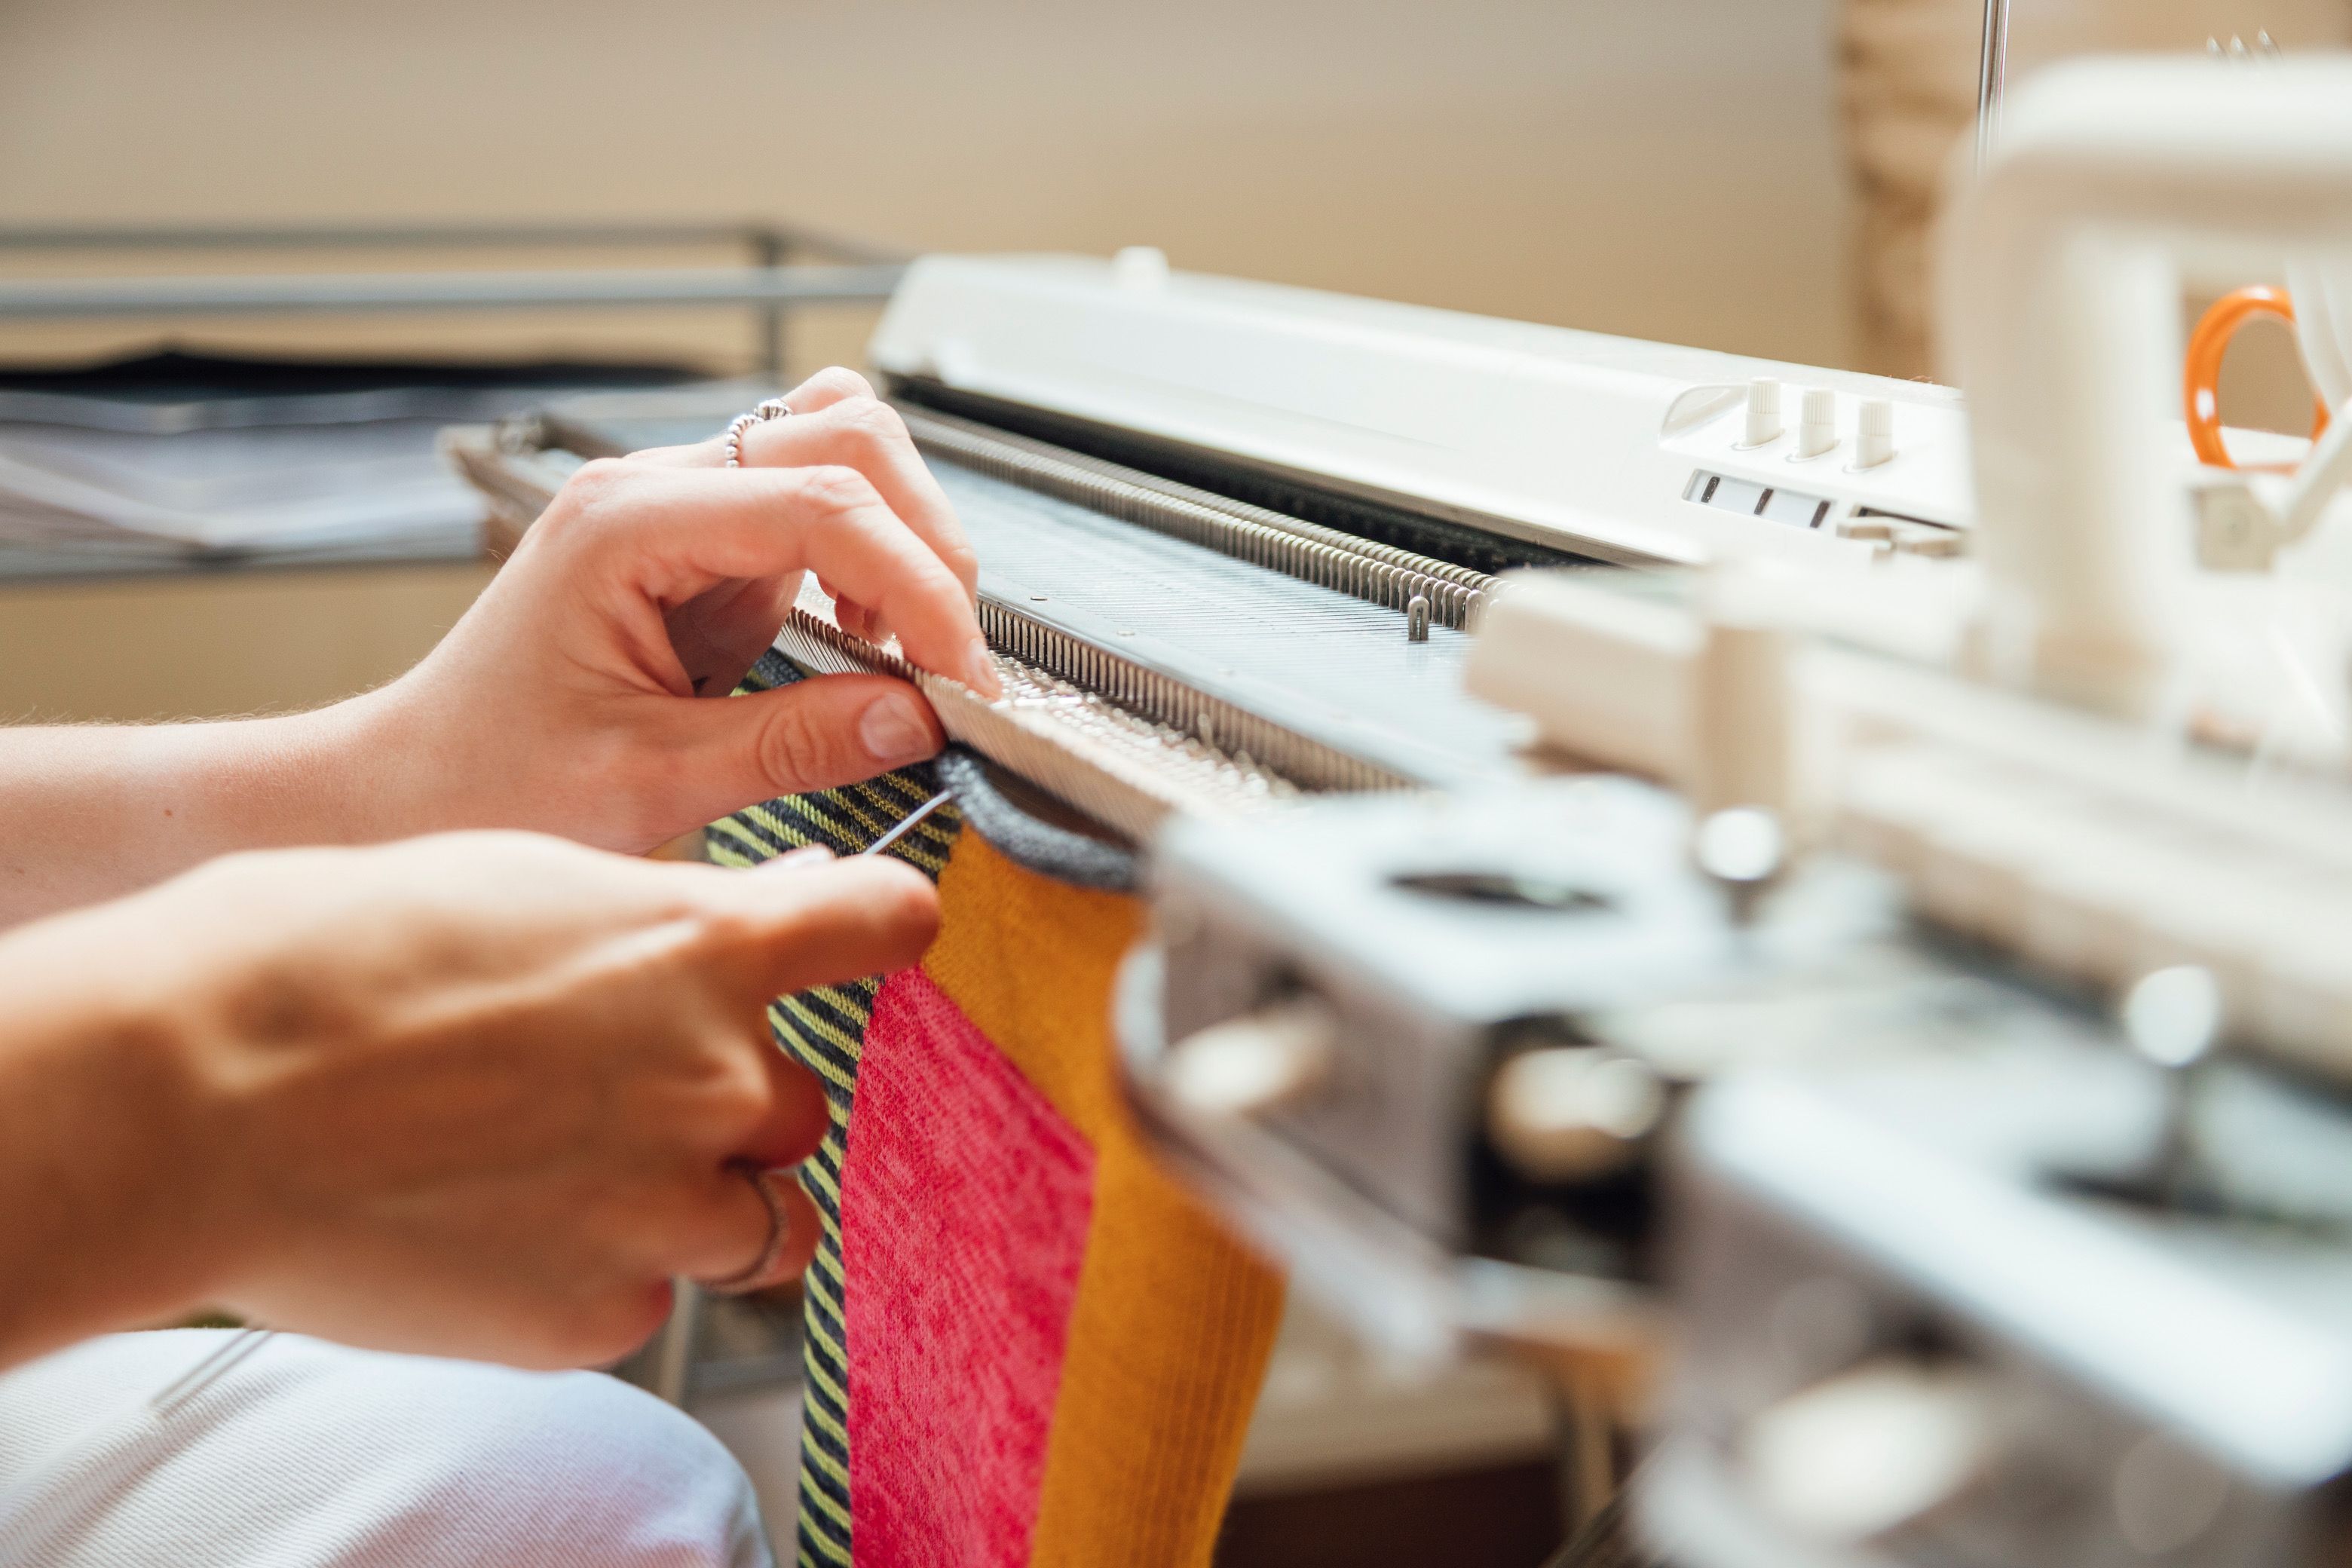 How to use a knitting machine and project ideas